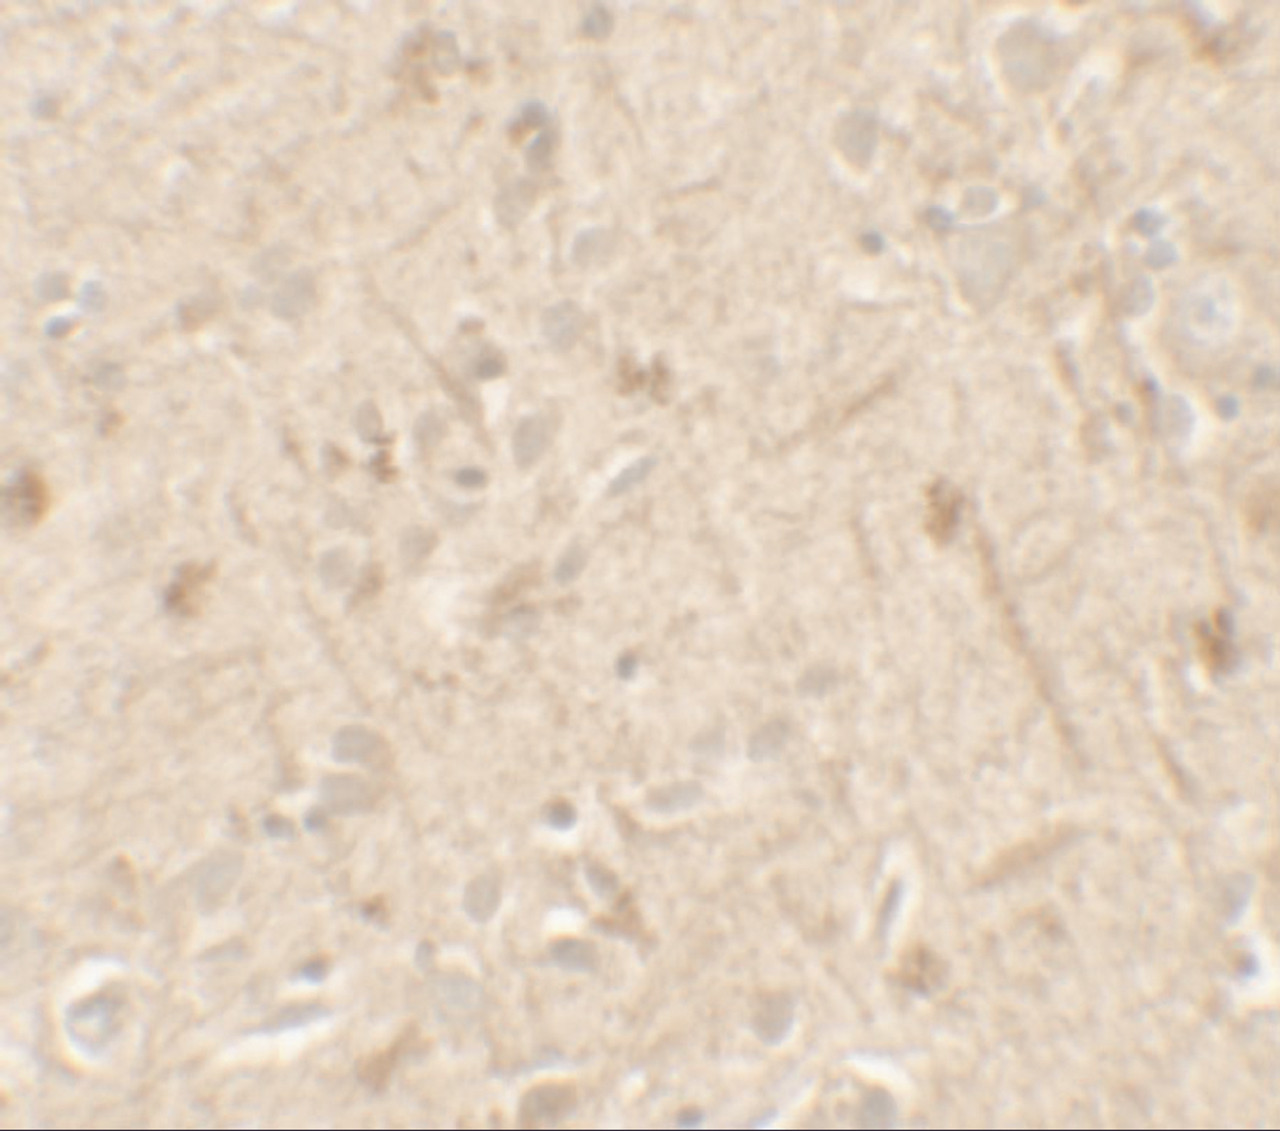 Immunohistochemistry of IL-36A in human brain tissue with IL-36A antibody at 5 ug/mL.